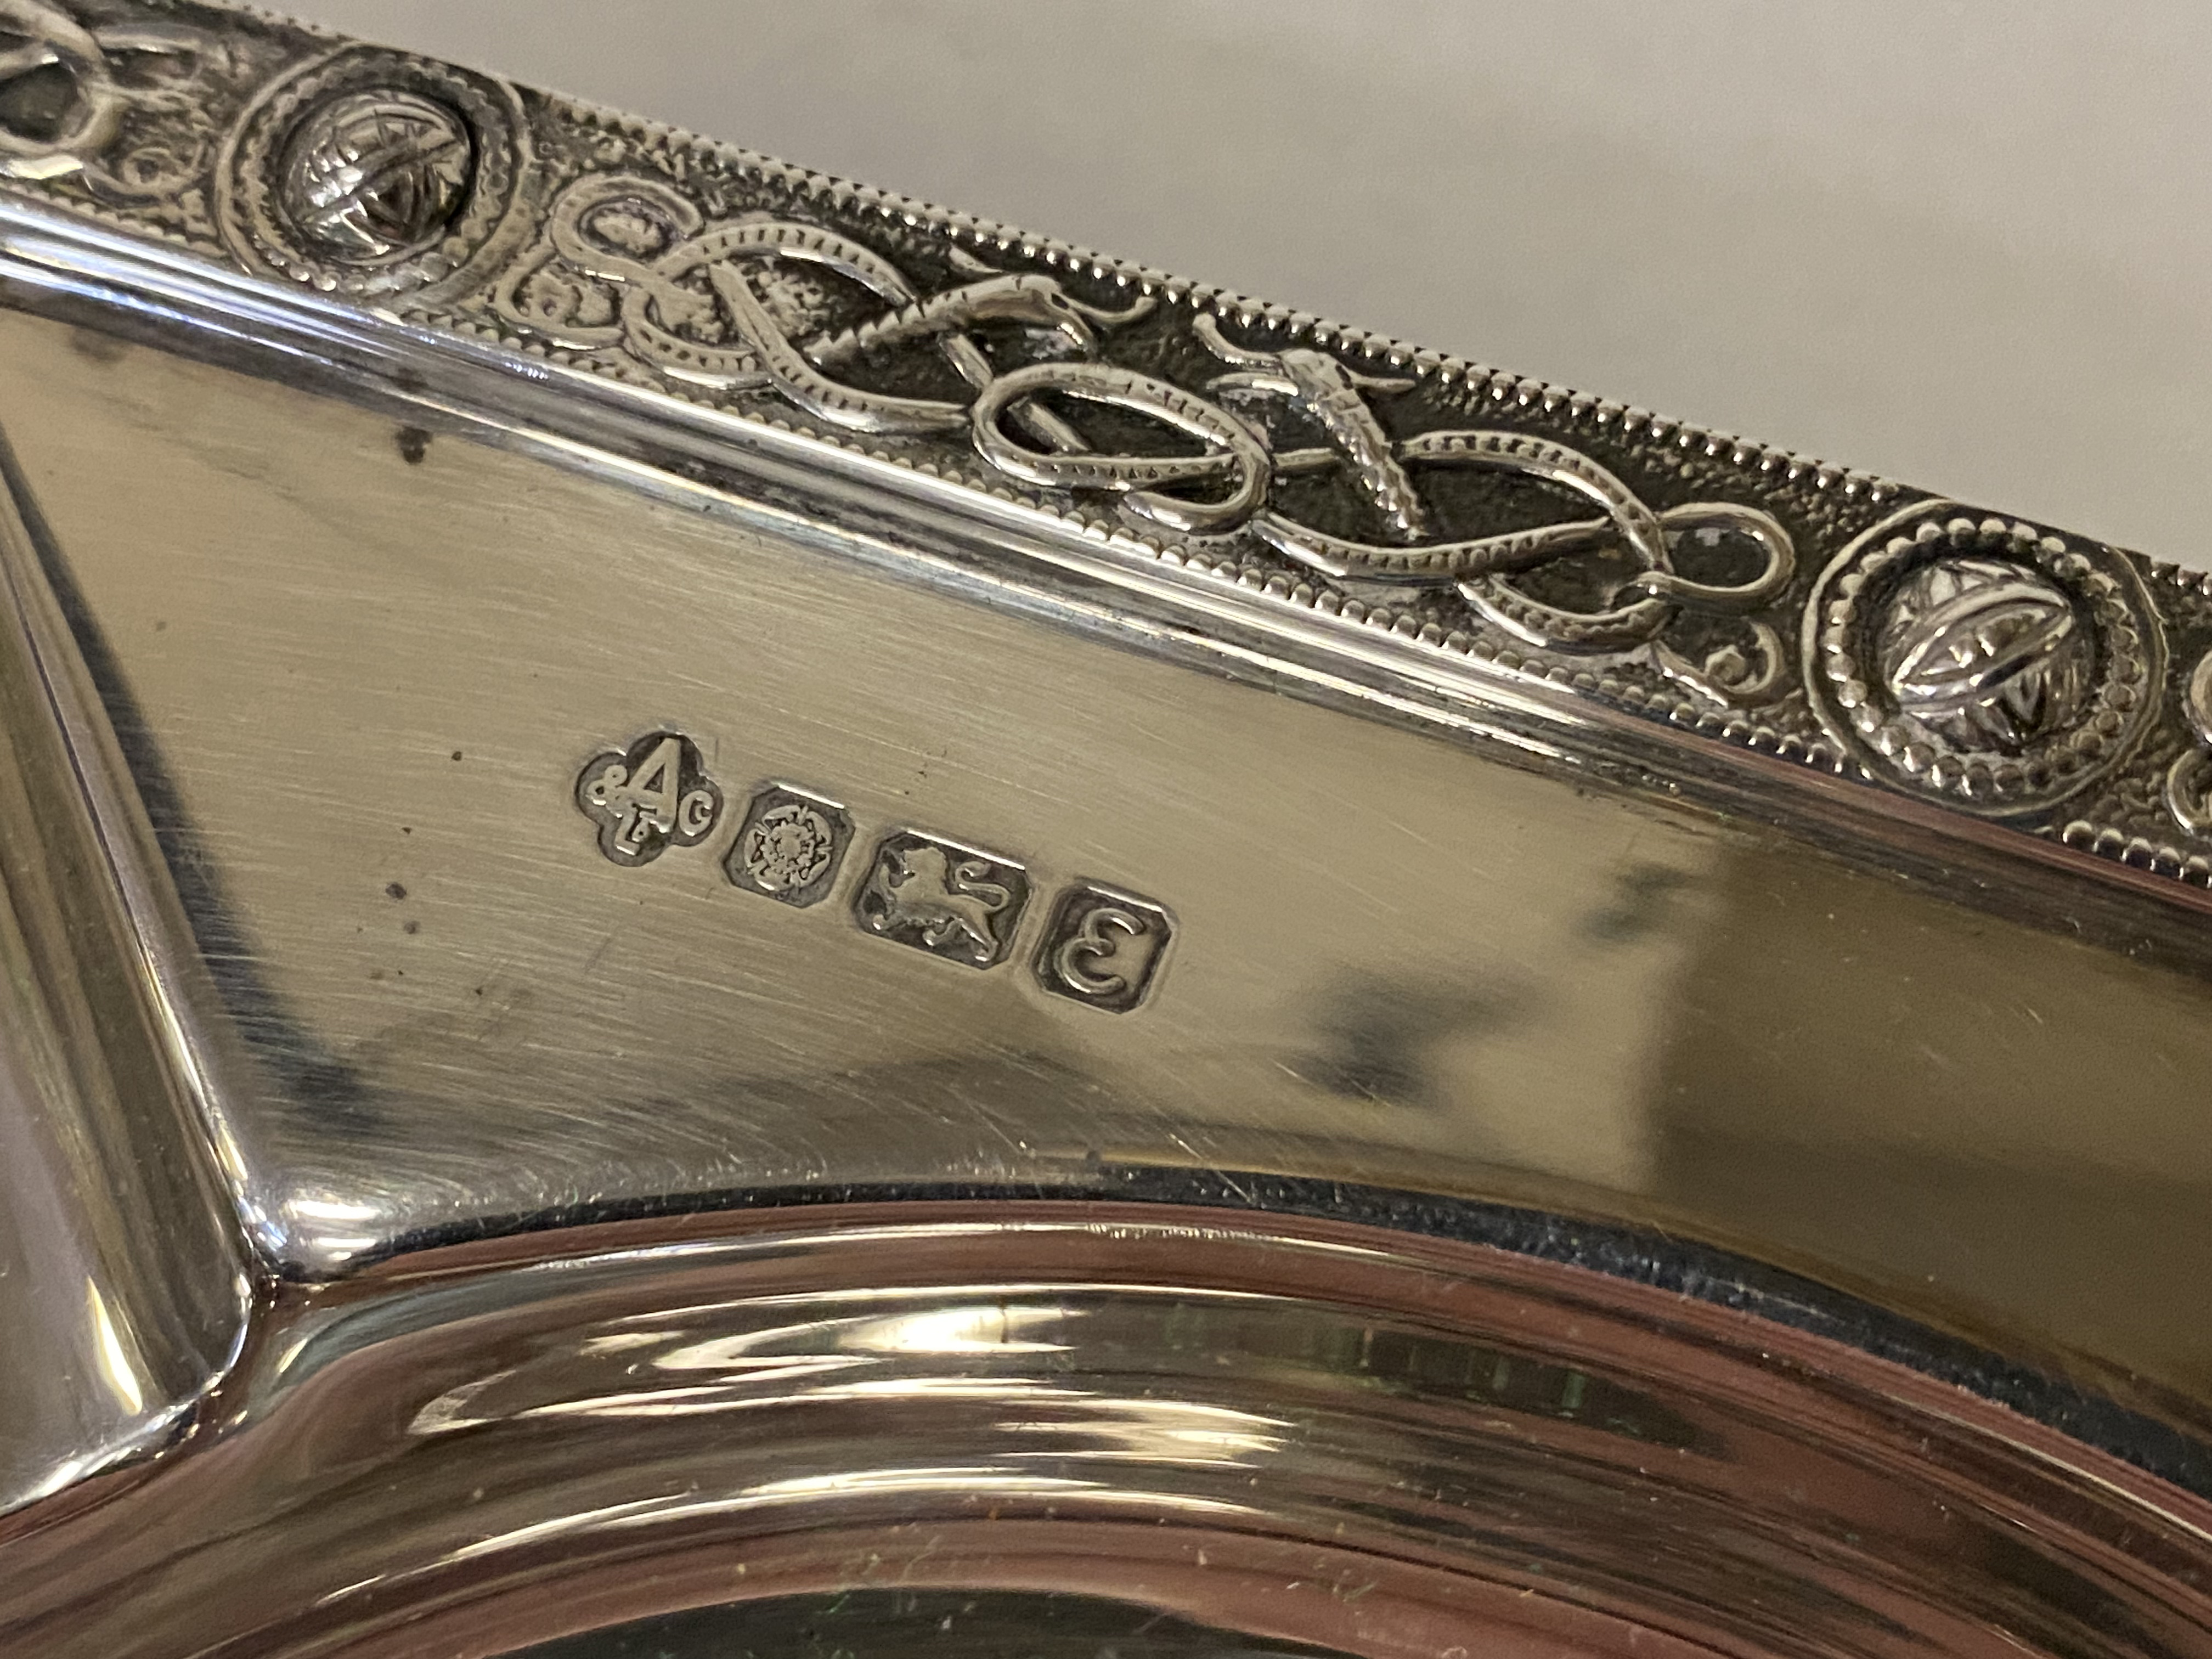 ASPREY HM SILVER ASHTRAY & 1 OTHER - 17 IMP OZS APPROX - Image 2 of 2